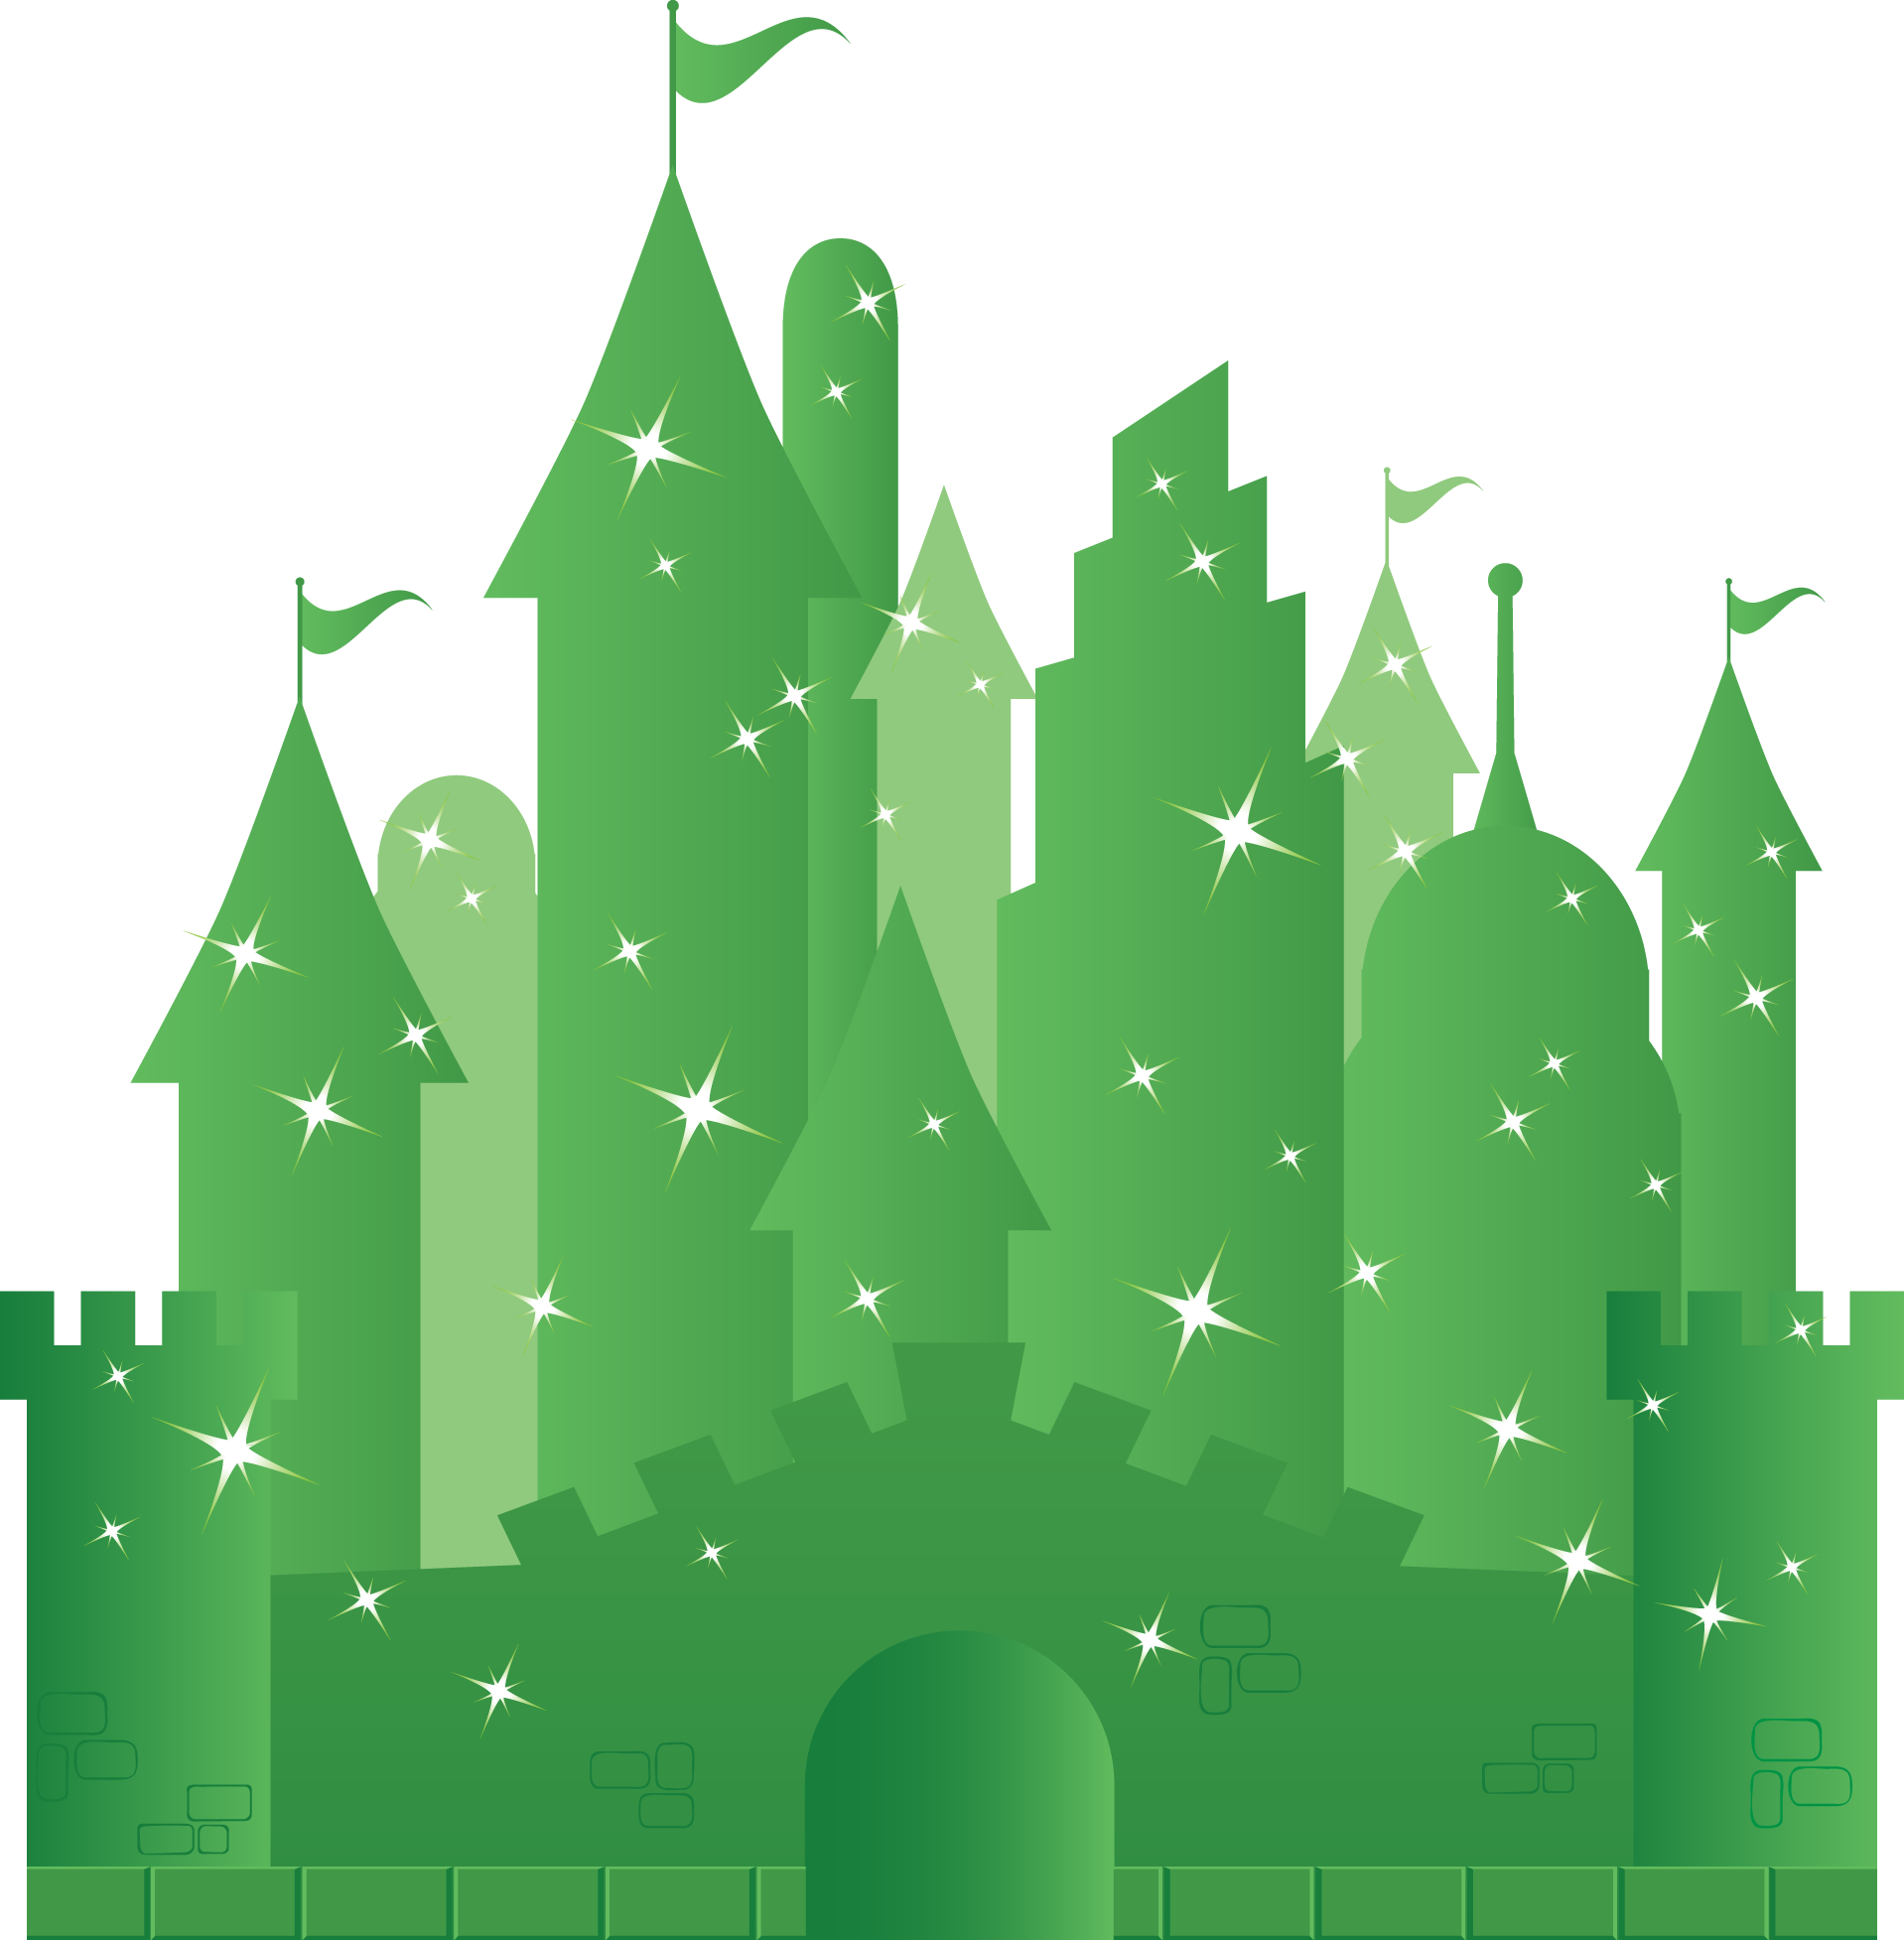 A Green Castle With Many Towers And Flags